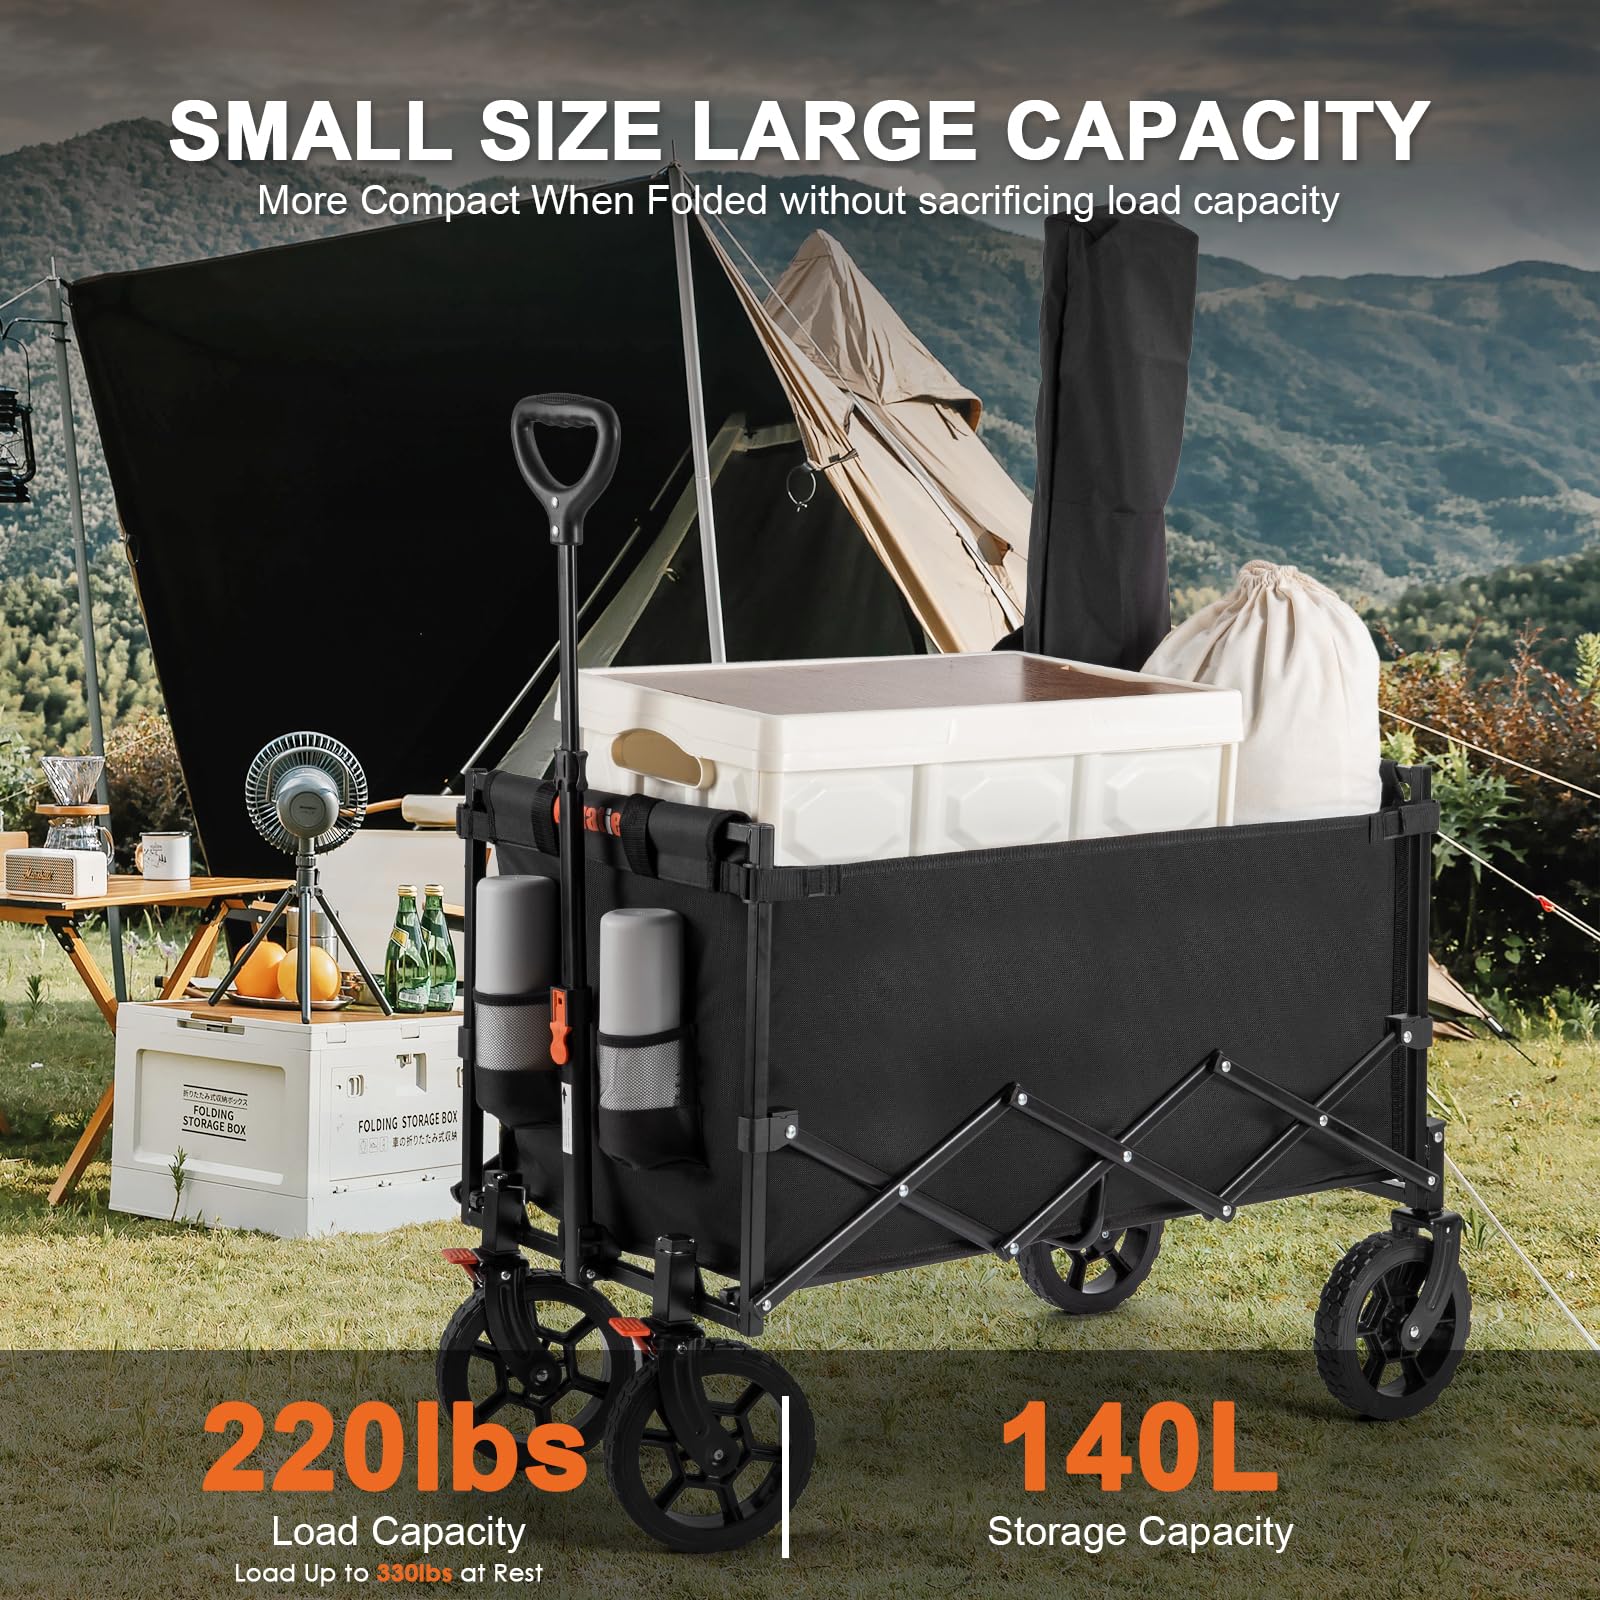 Navatiee Wagon Cart Heavy Duty Foldable, Collapsible Wagon with Smallest Folding Design, Utility Grocery Wagon for Camping Shopping Sports